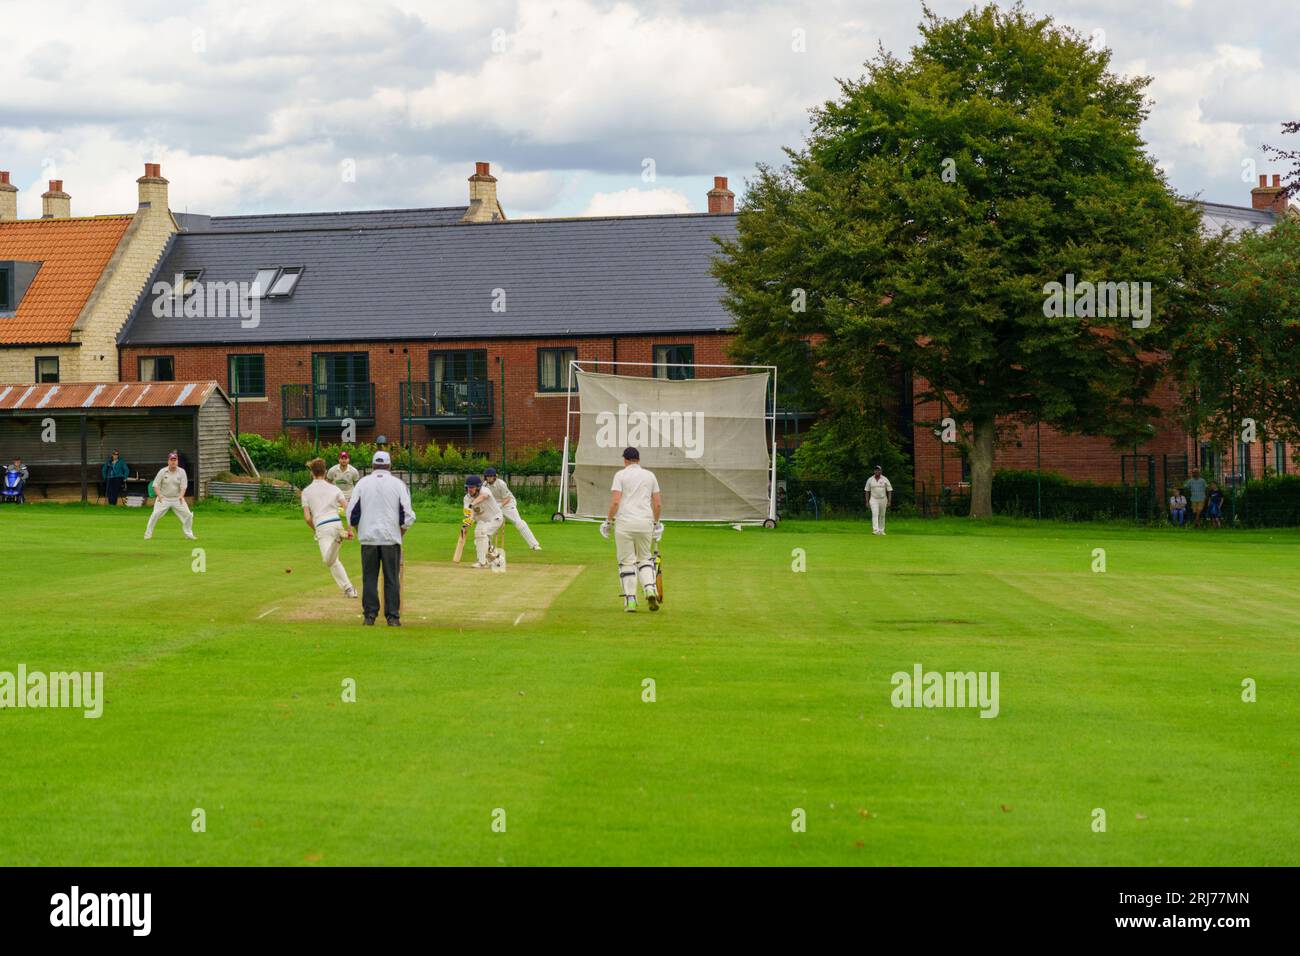 Batsman blocks the ball during a Duncombe Park Cricket Club Sunday League match at Helmsley Sports & Recreation Ground in West Yorkshire, UK. Stock Photo